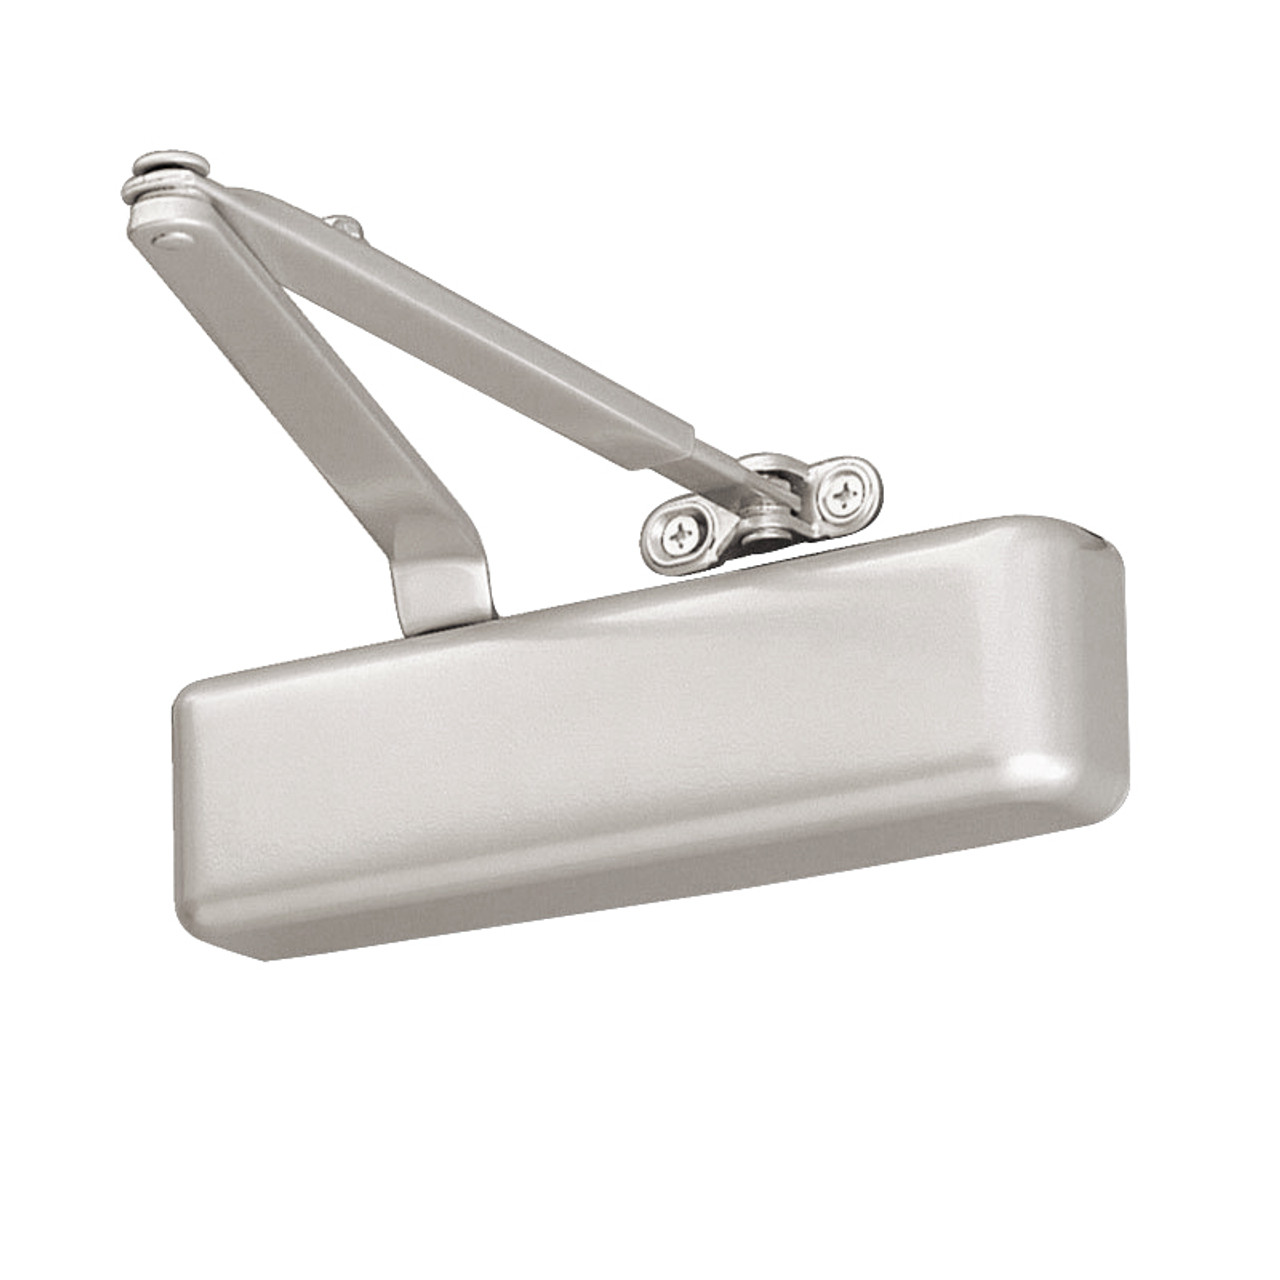 4031-H-US15 LCN Door Closer with Hold Open Arm in Satin Nickel Finish